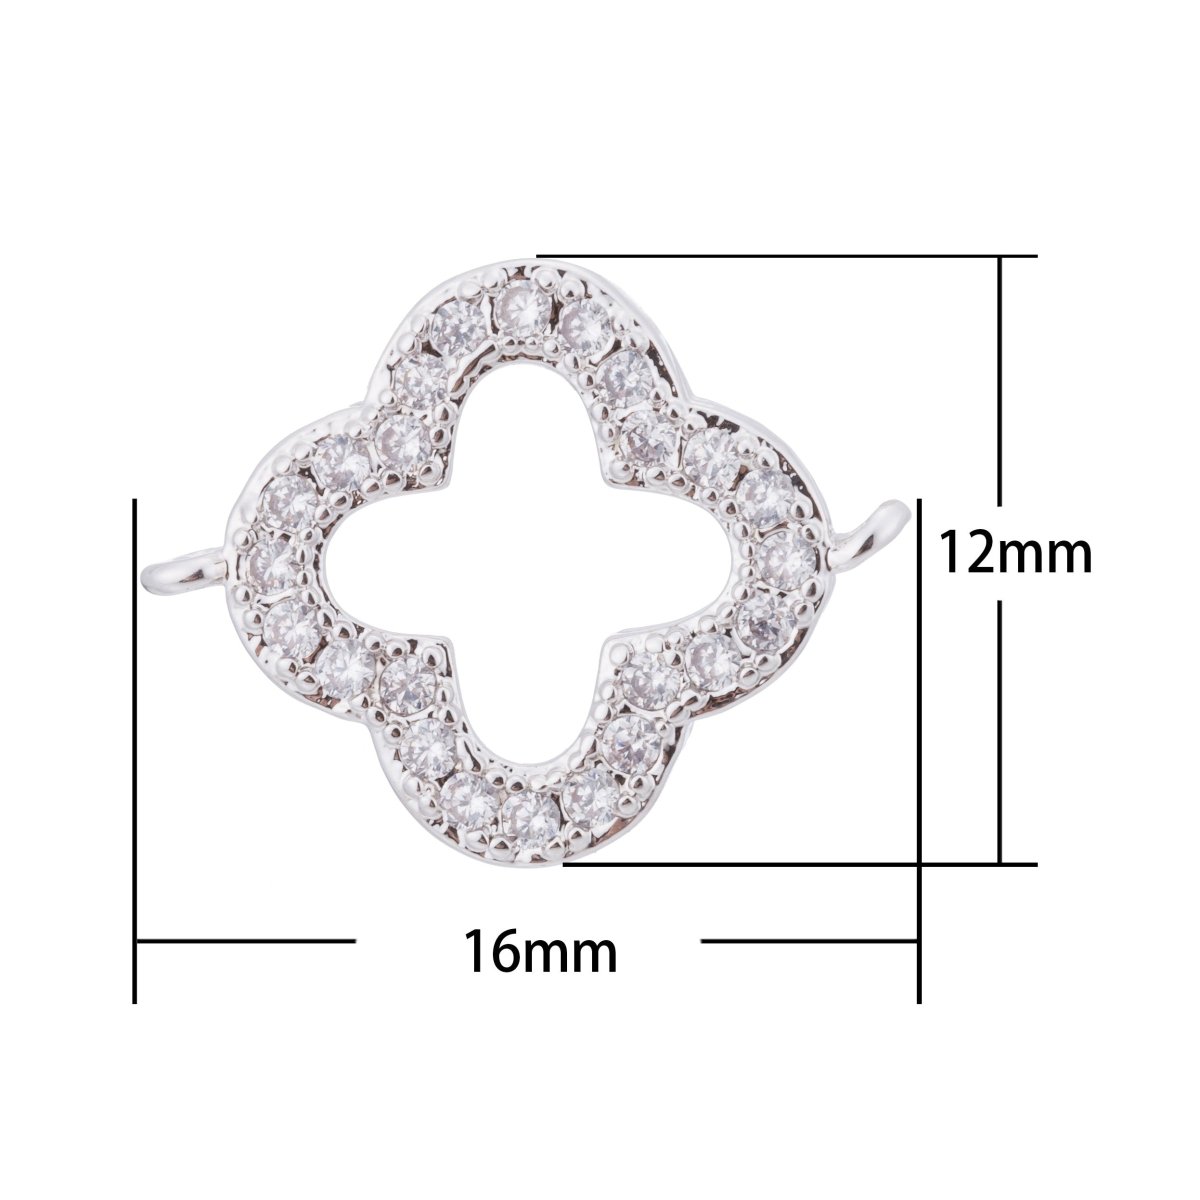 Gold Filled Cubic Zirconia Daisy Clover Flower Charm Bracelet Bead CONNECTOR for Jewelry Making Finding | F-100 - DLUXCA